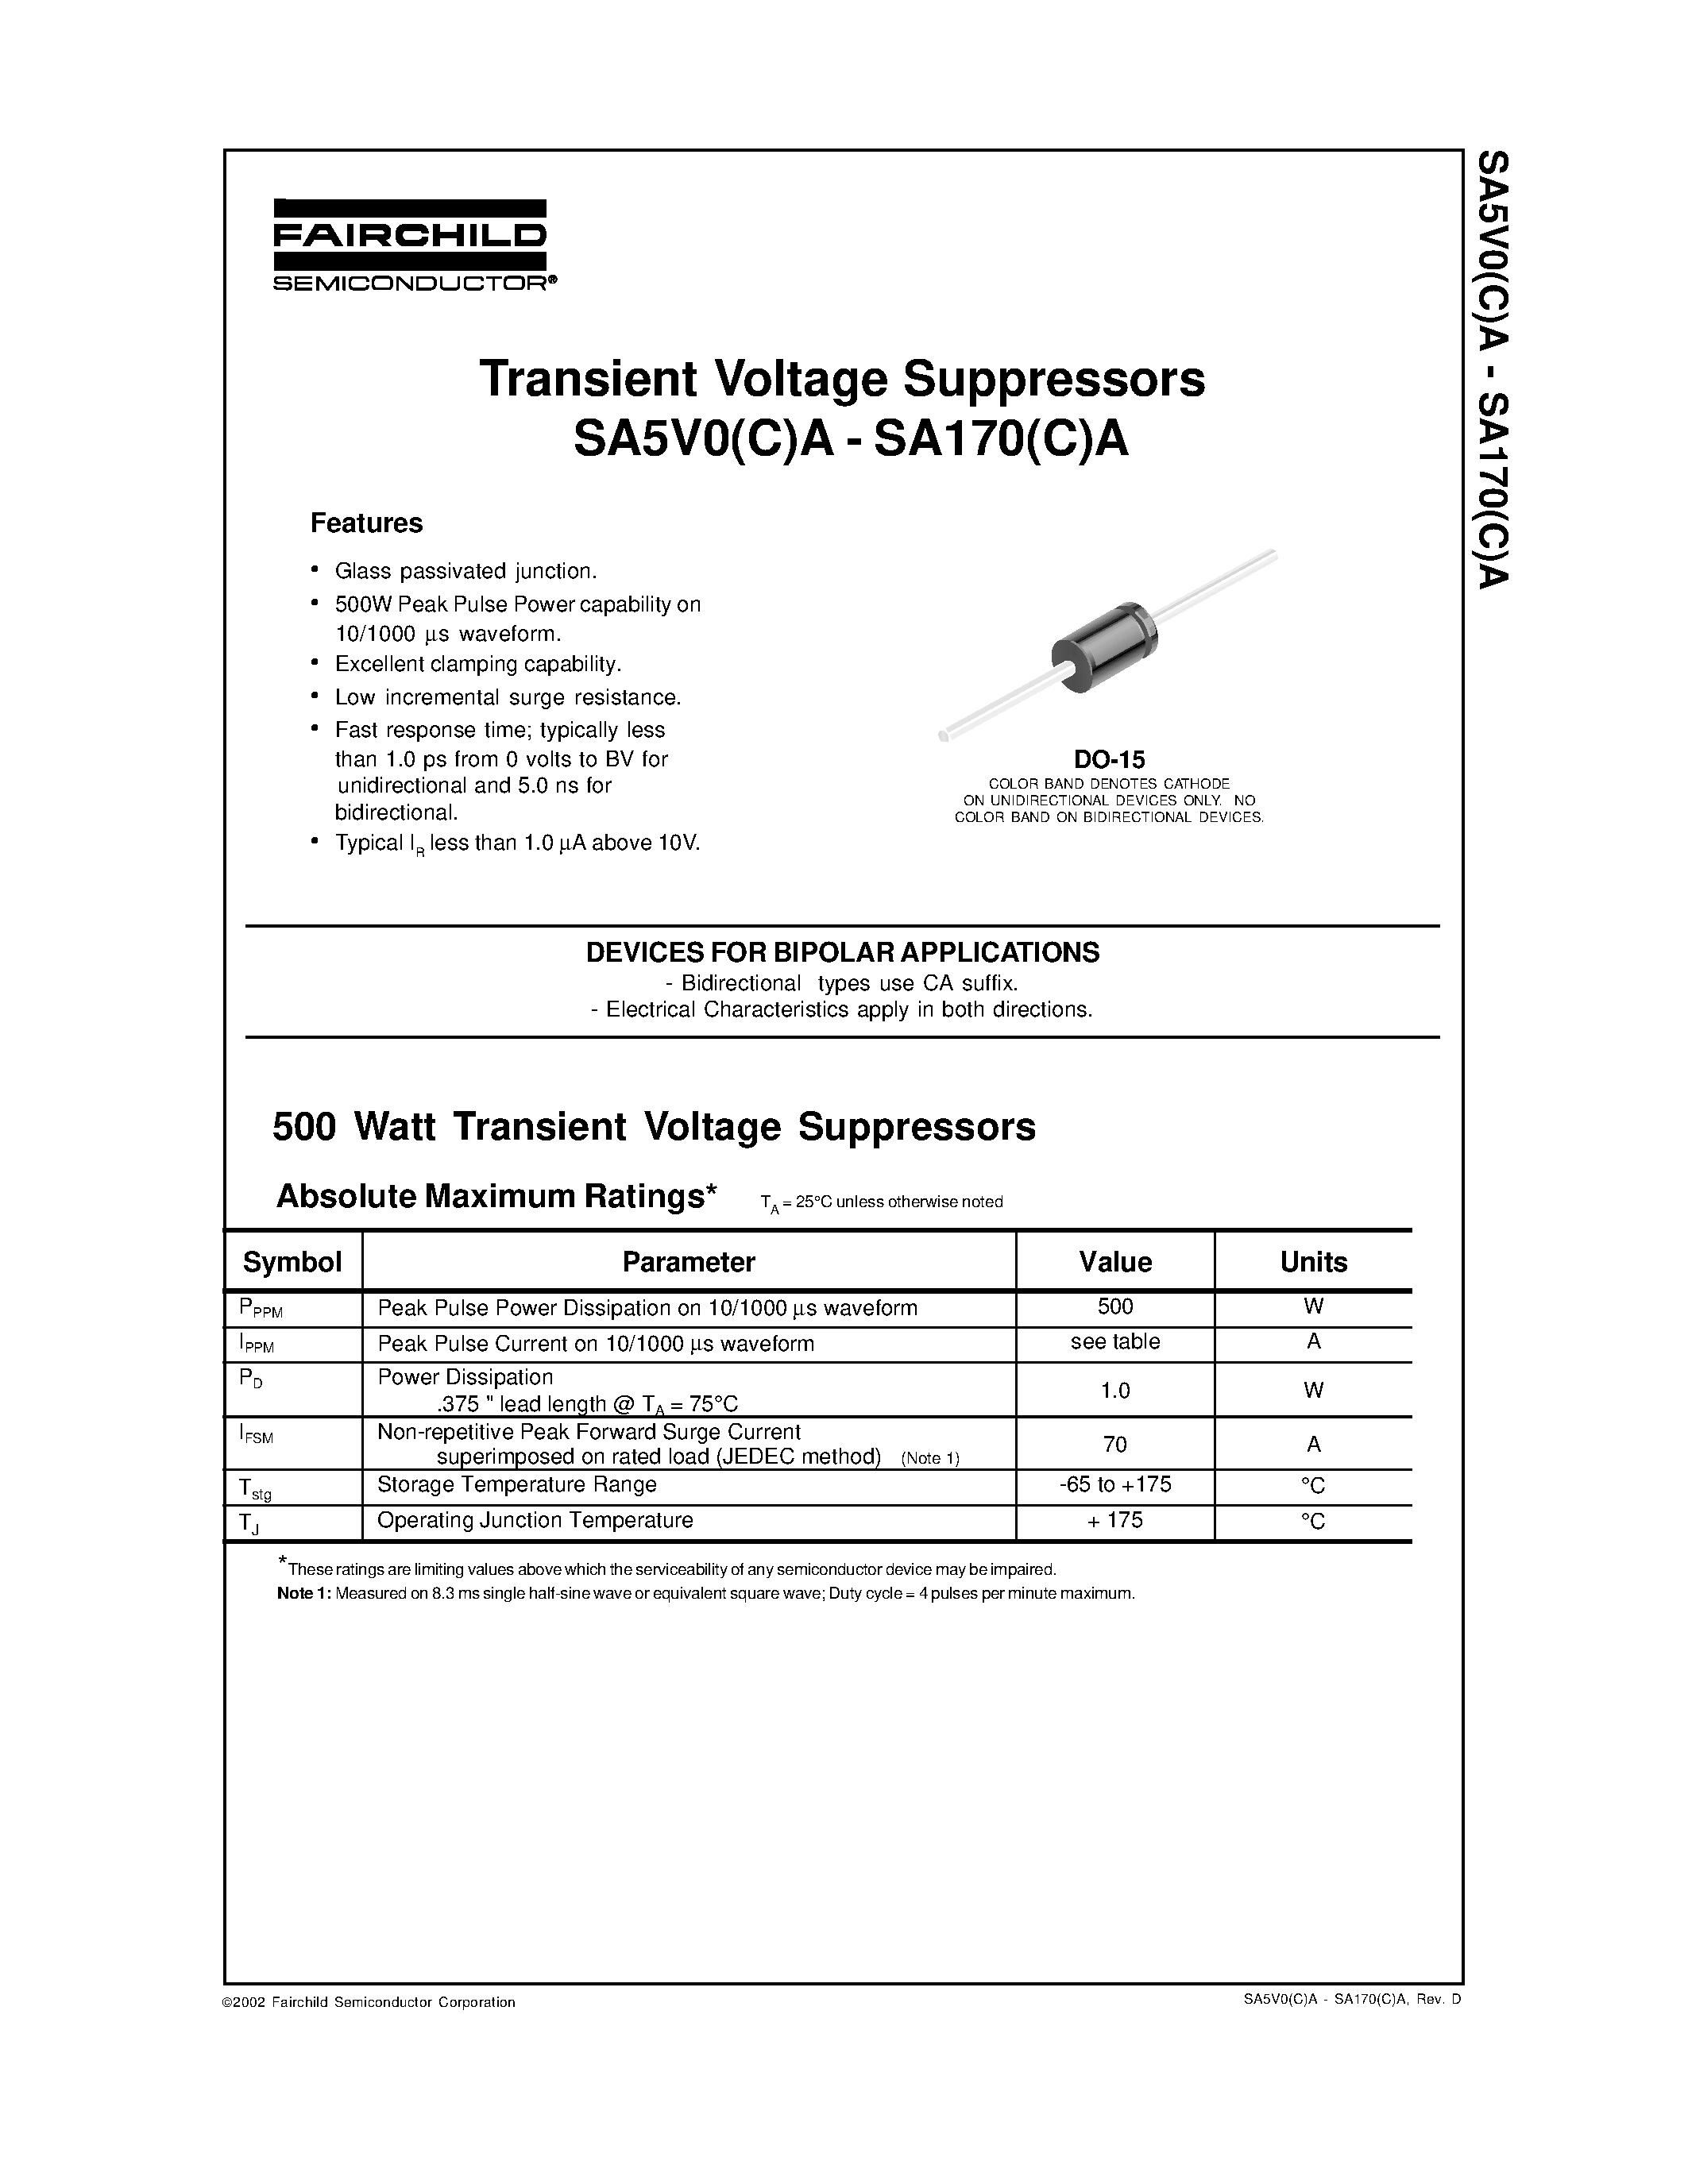 Datasheet SA26A - Transient Voltage Suppressors page 1